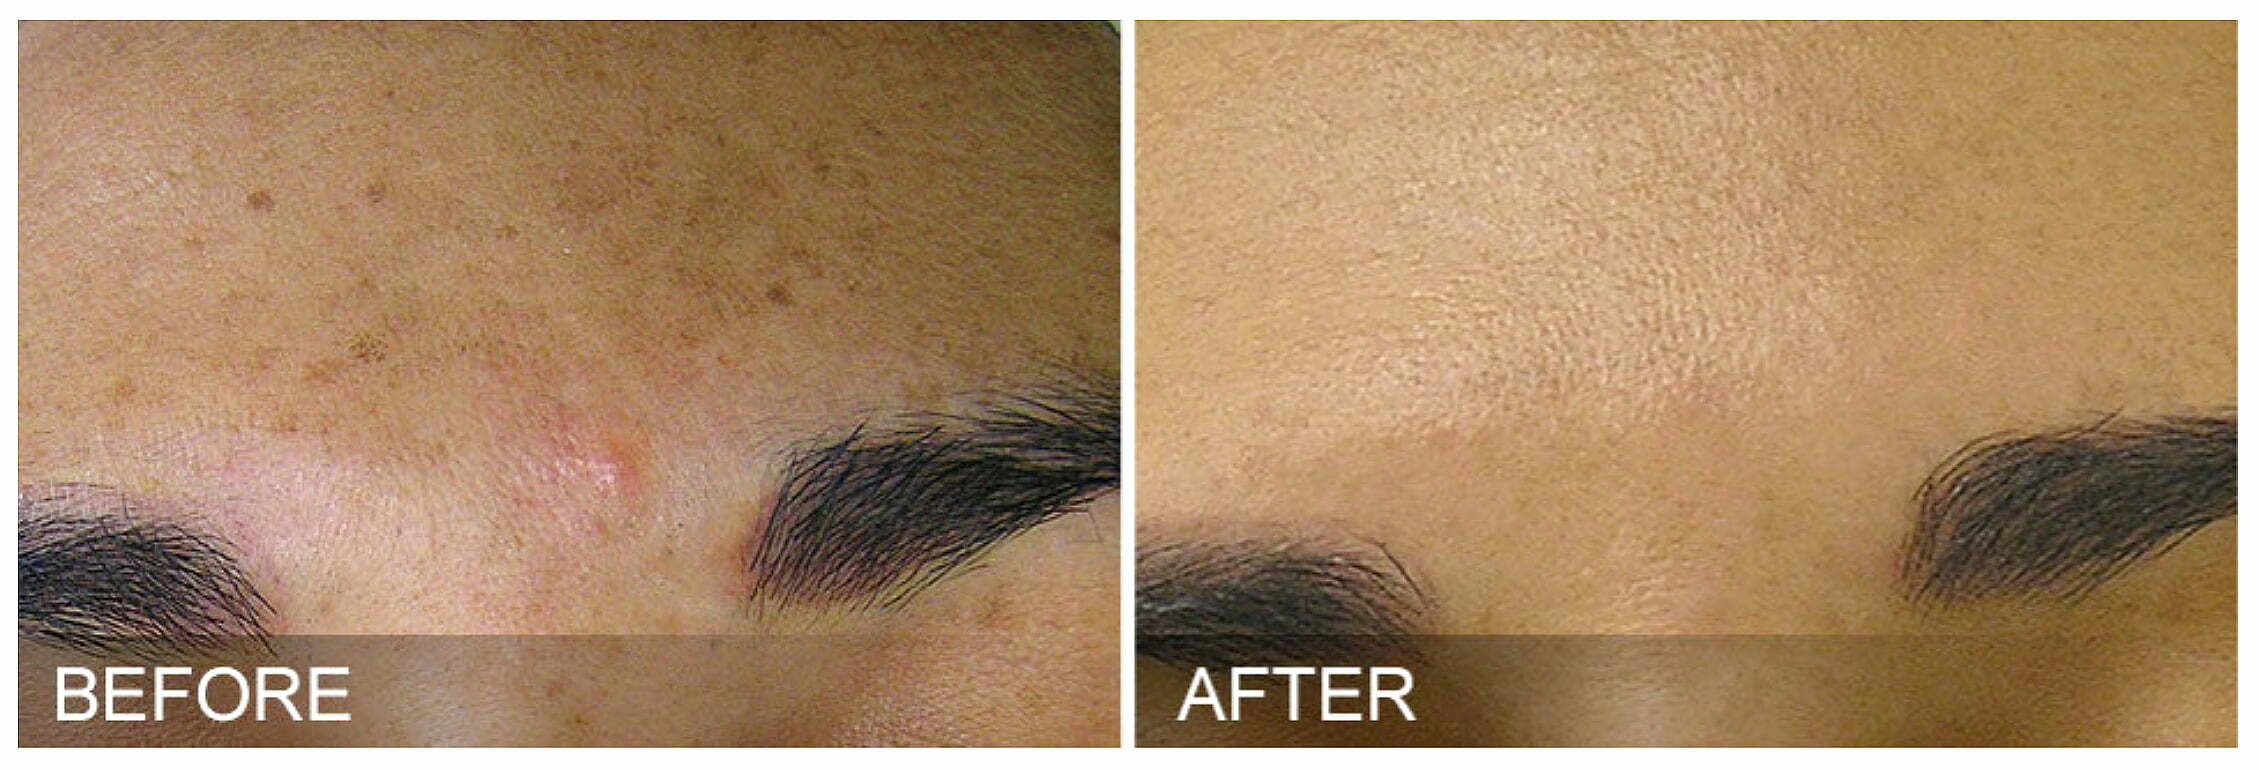 HydraFacial Before and After